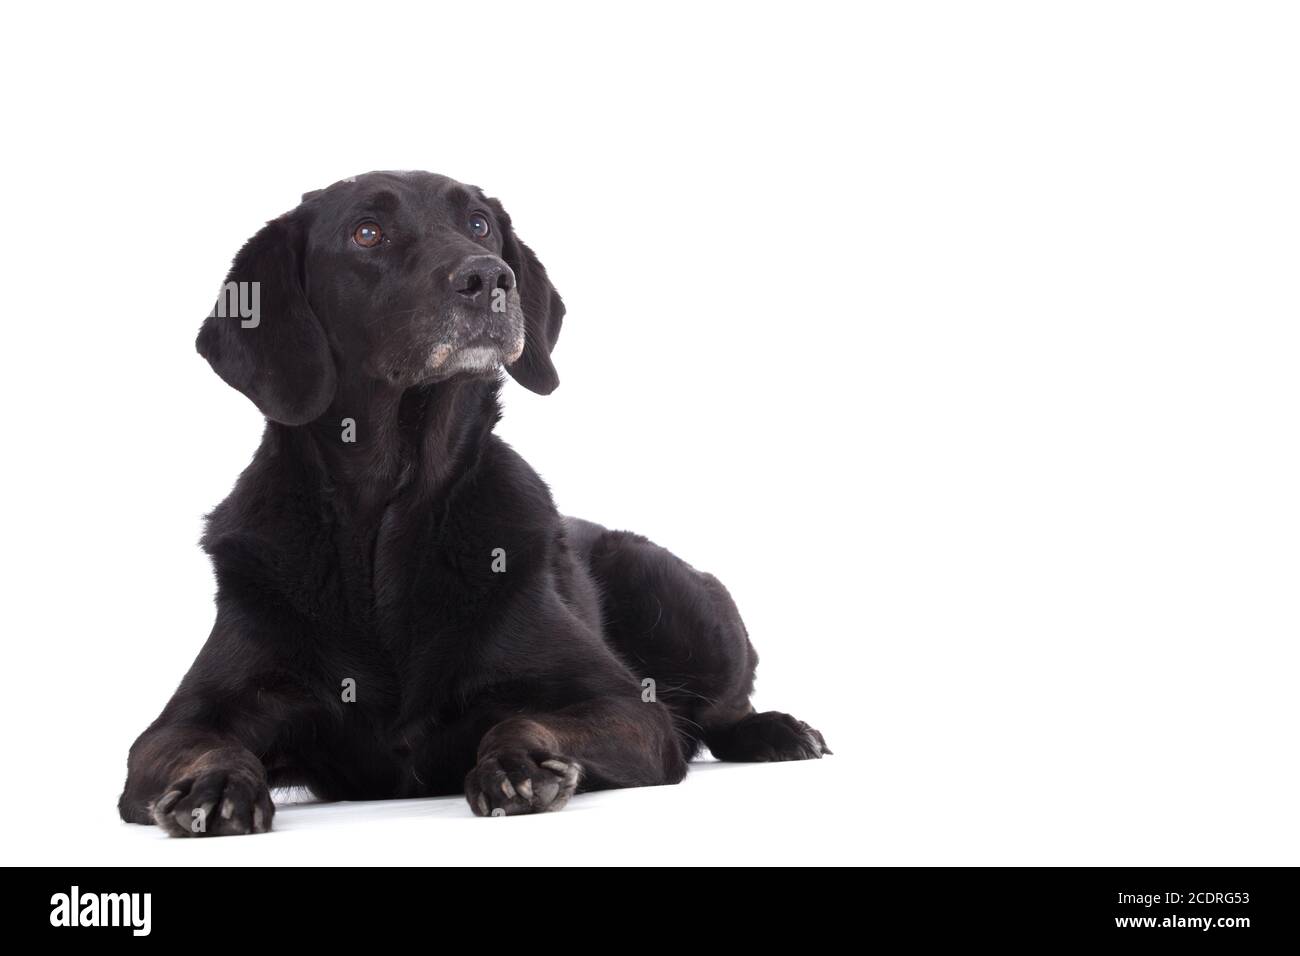 labrador is laying down Stock Photo